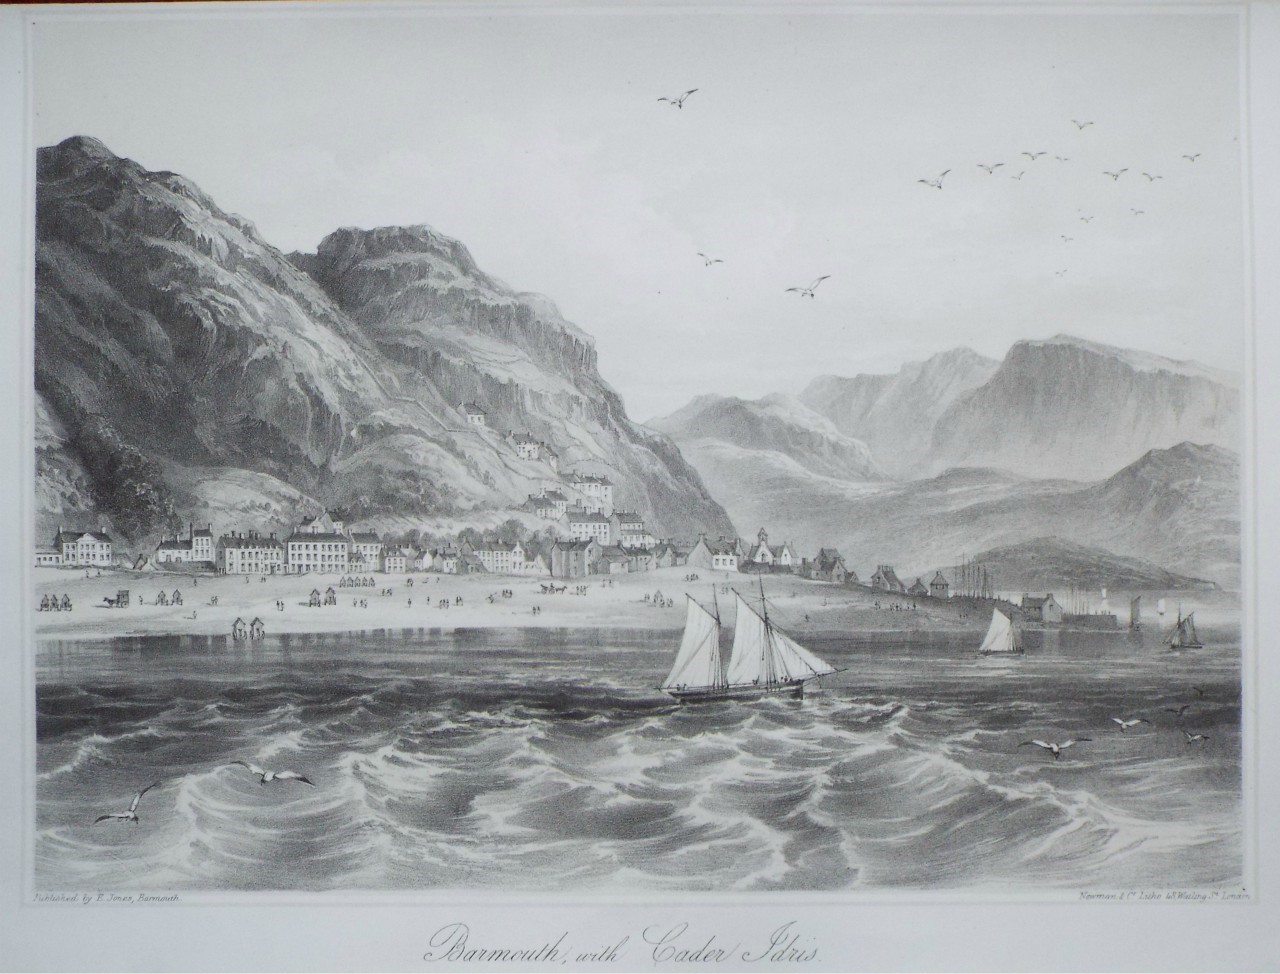 Lithograph - Barmouth, with Cader Idris.